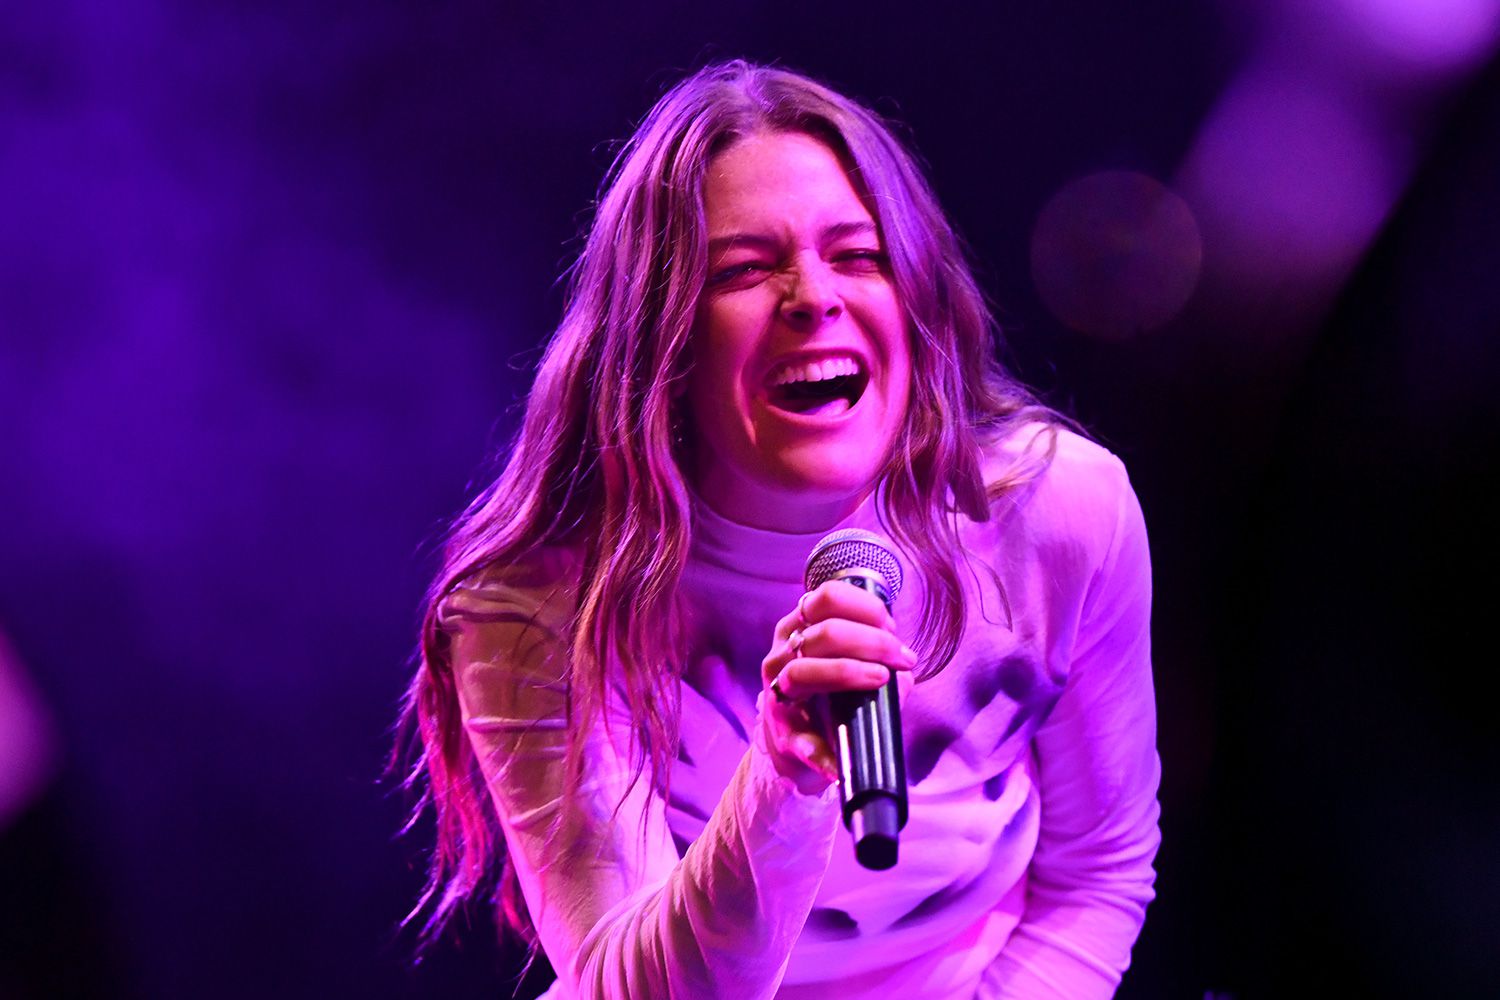 Maggie Rogers performs onstage during Spotify Hosts "Best New Artist" Party at The Lot Studios on January 23, 2020 in Los Angeles, California